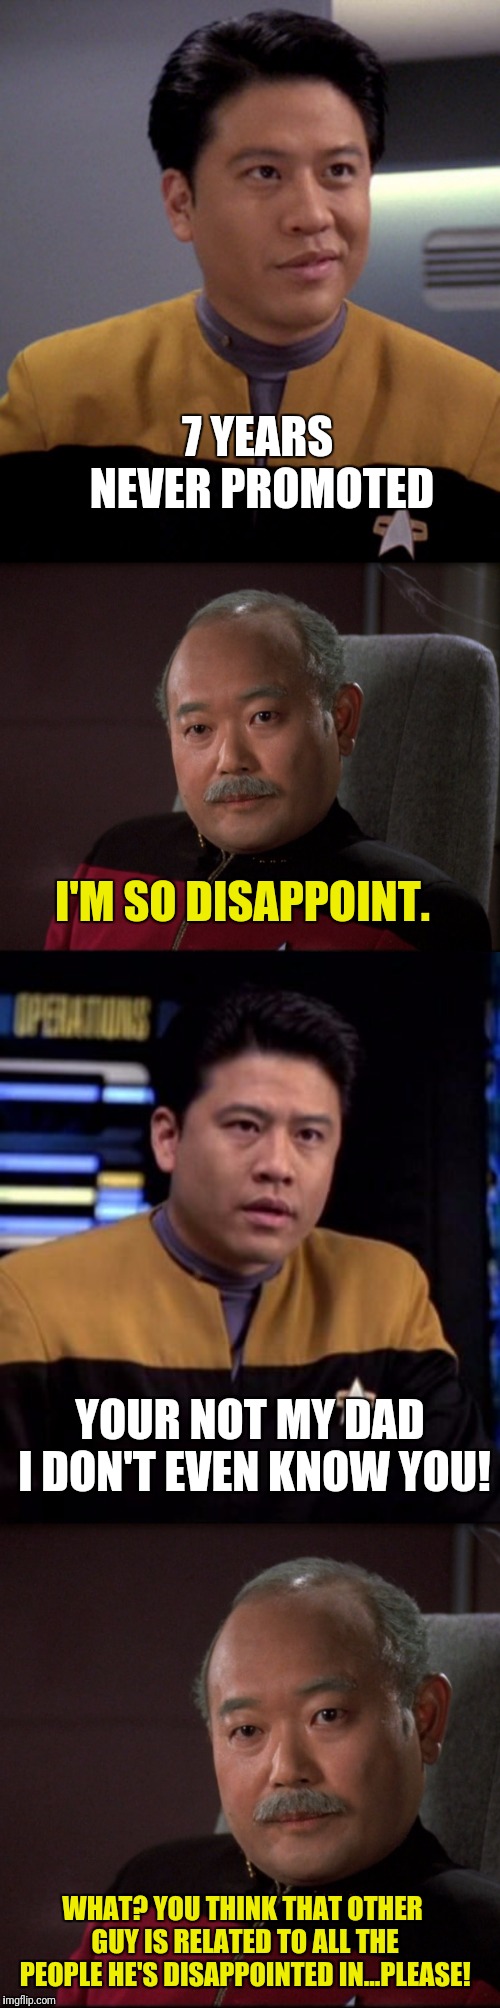 Very Very Dishonor | 7 YEARS NEVER PROMOTED; I'M SO DISAPPOINT. YOUR NOT MY DAD I DON'T EVEN KNOW YOU! WHAT? YOU THINK THAT OTHER GUY IS RELATED TO ALL THE PEOPLE HE'S DISAPPOINTED IN...PLEASE! | image tagged in dissapointed,star trek,asian dad,harry,kim jong un | made w/ Imgflip meme maker